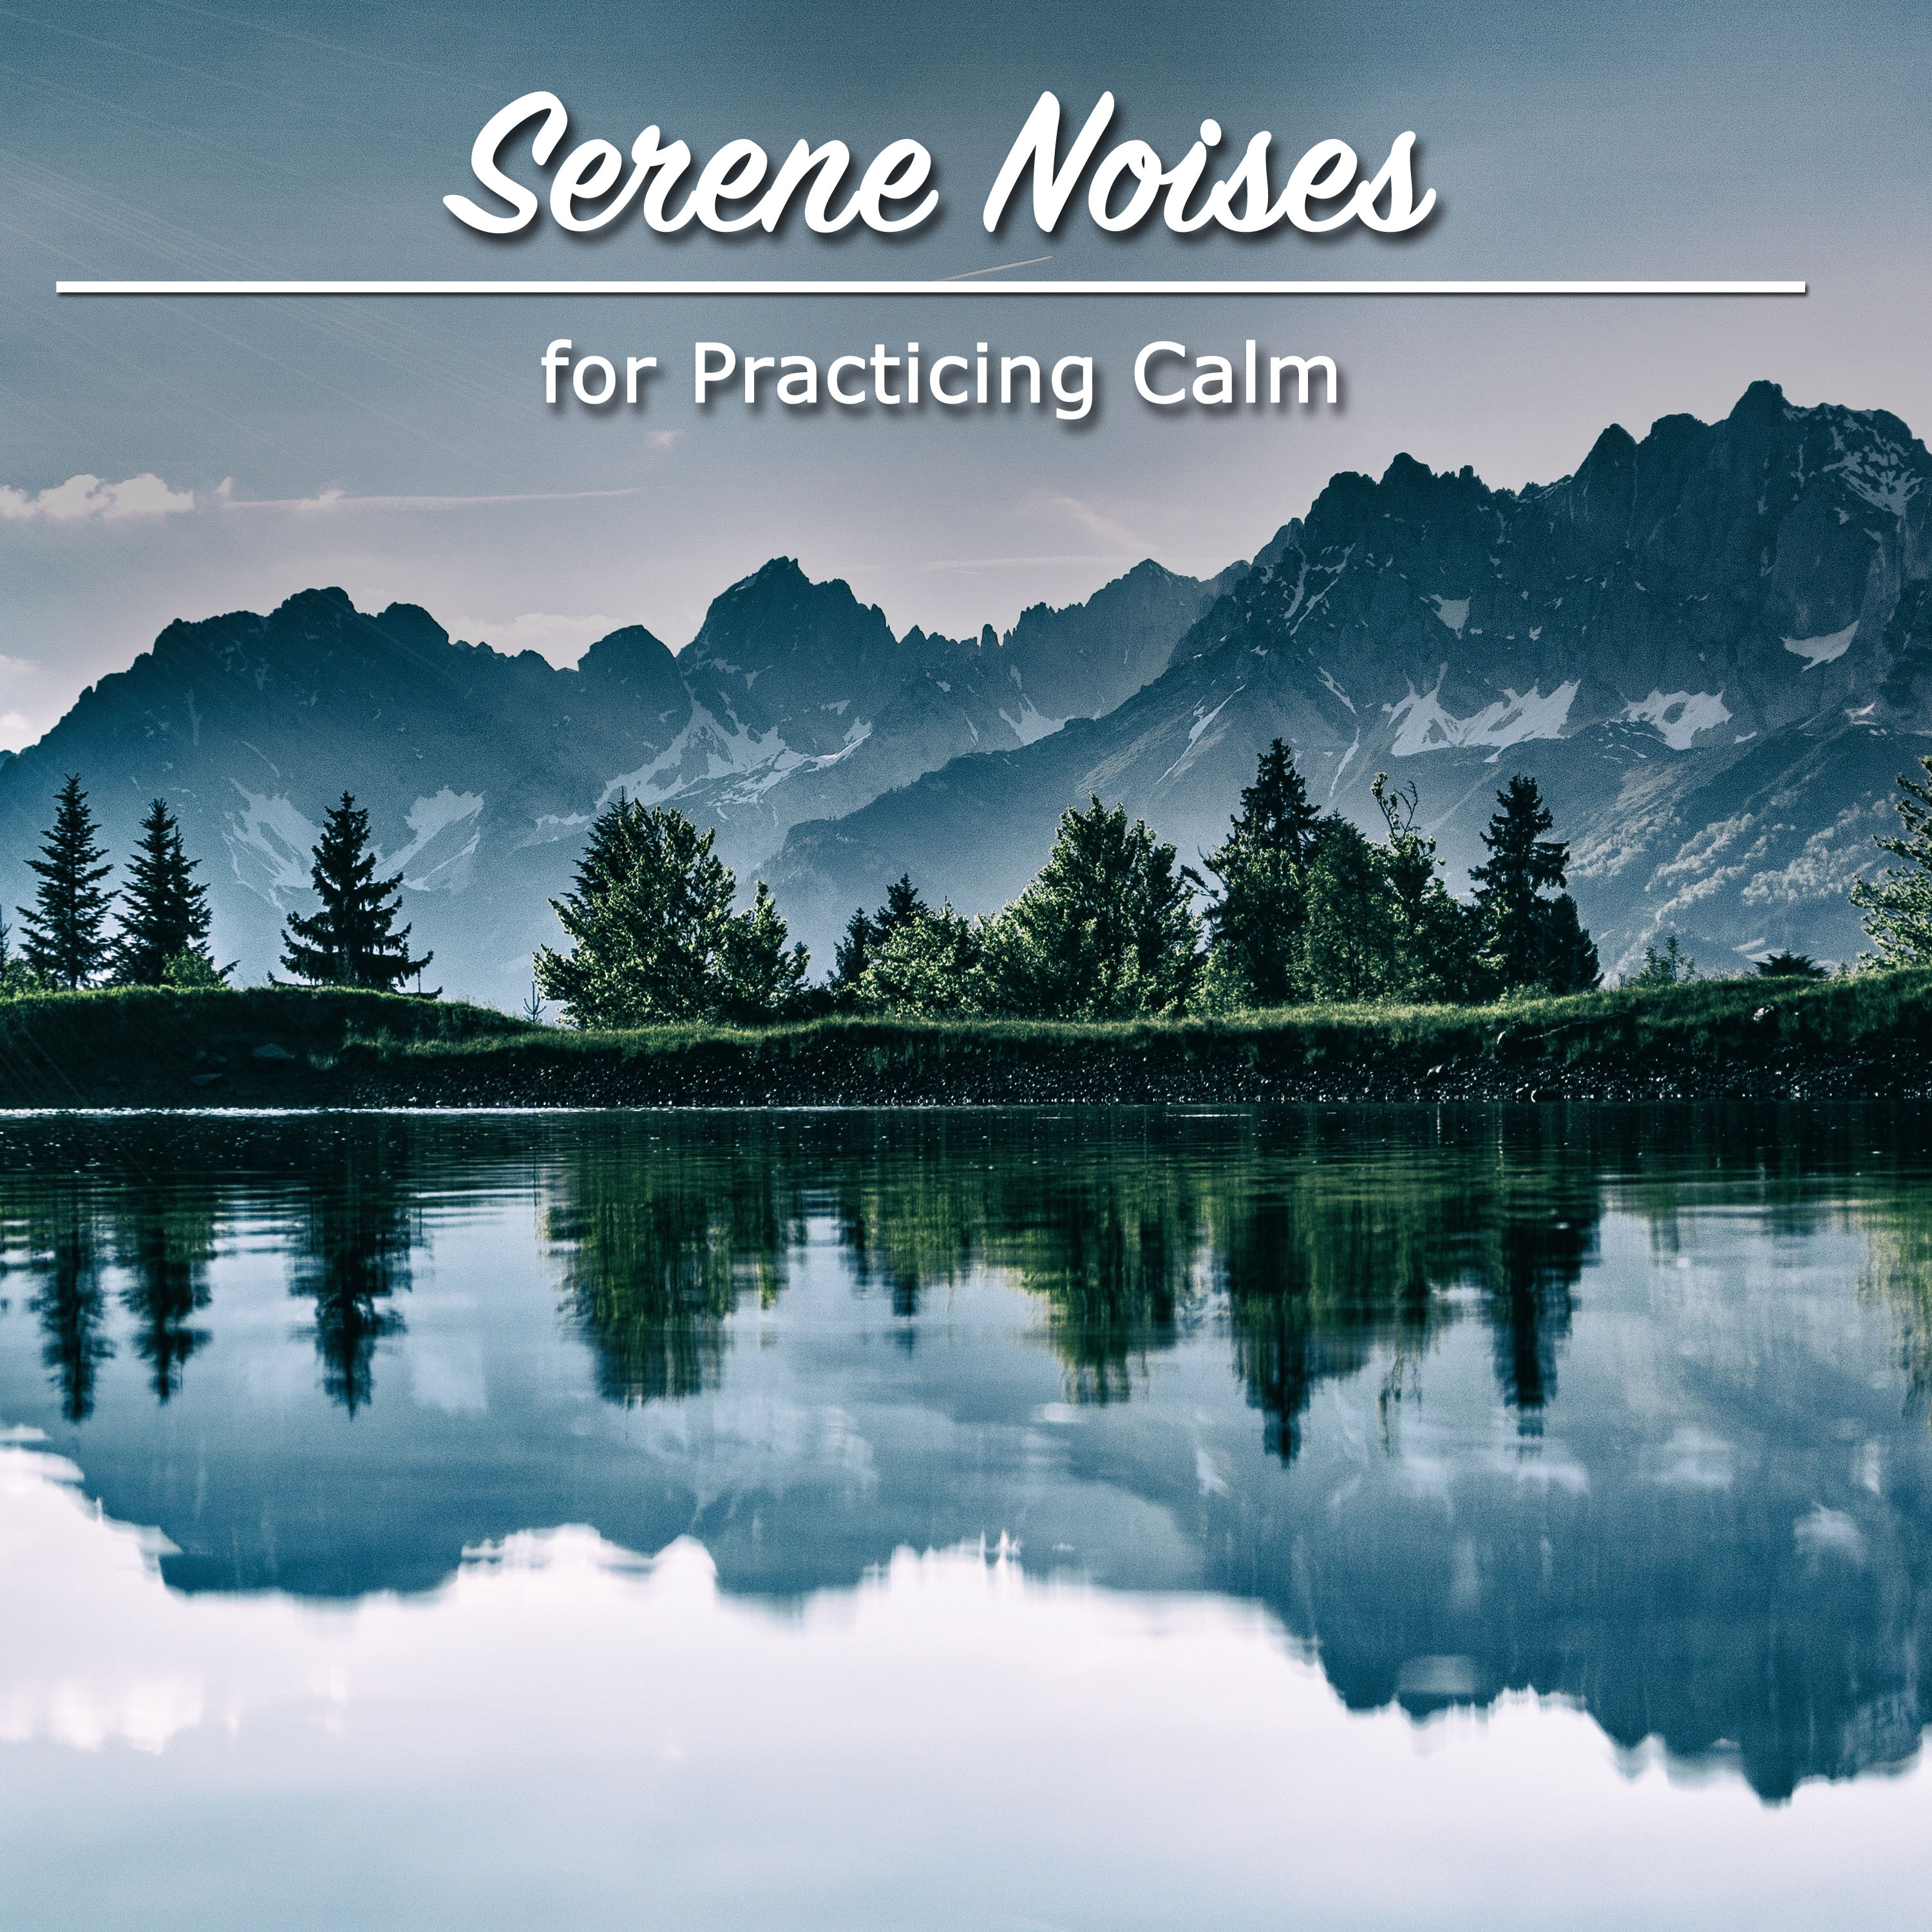 #13 Serene Noises for Practicing Calm